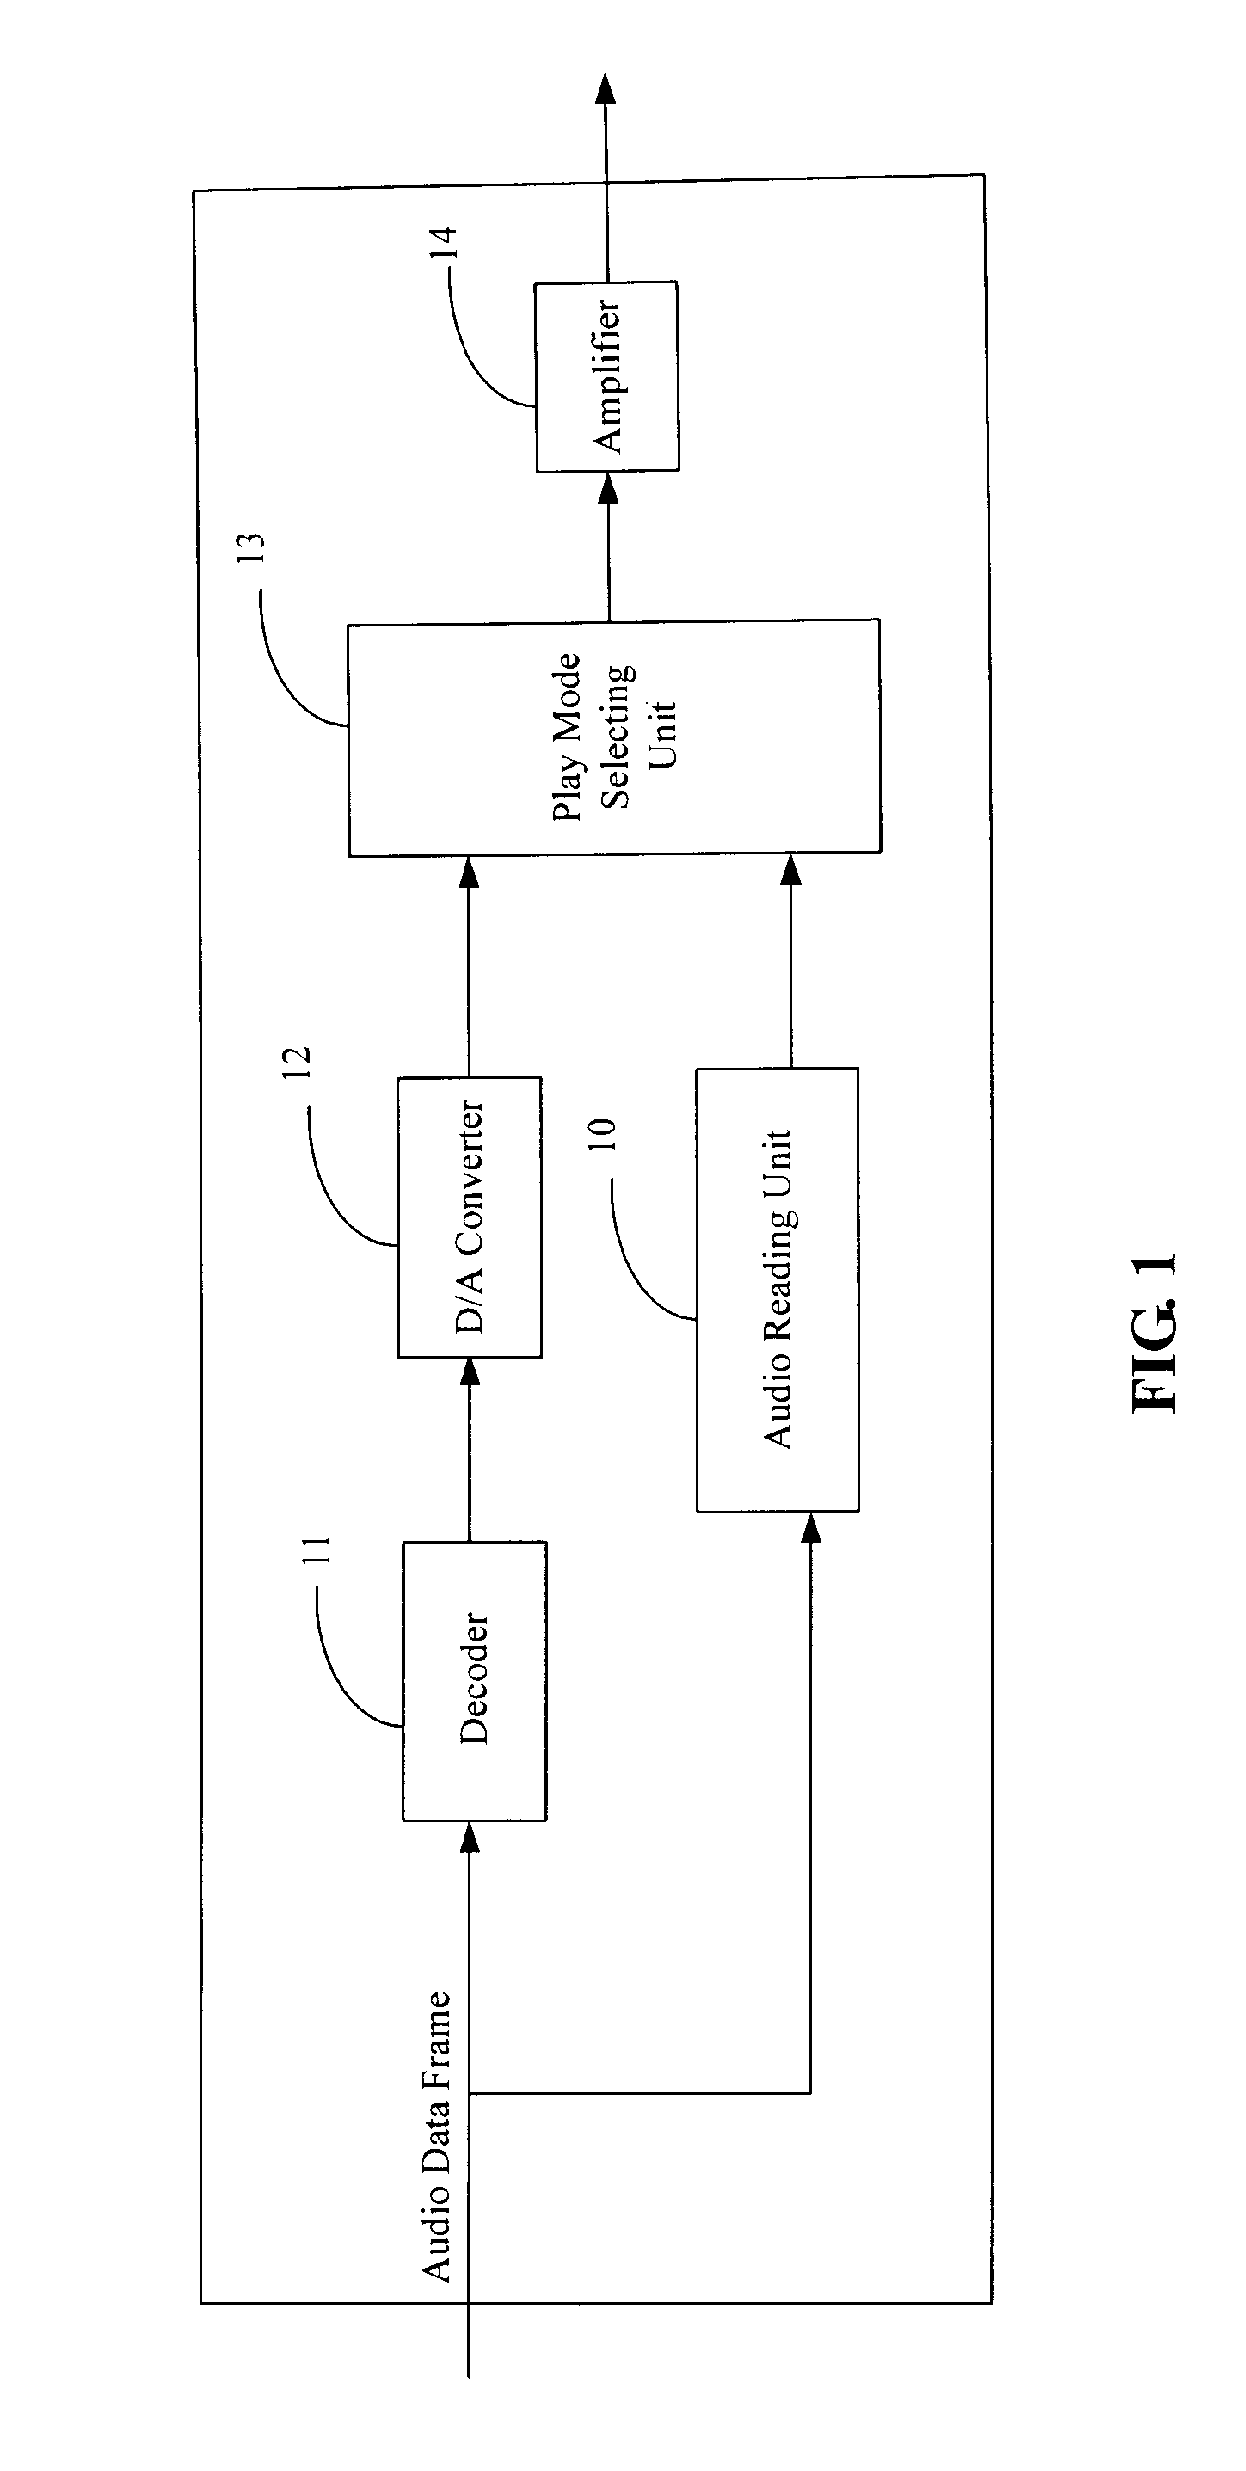 Apparatus and method for automatically selecting an audio play mode